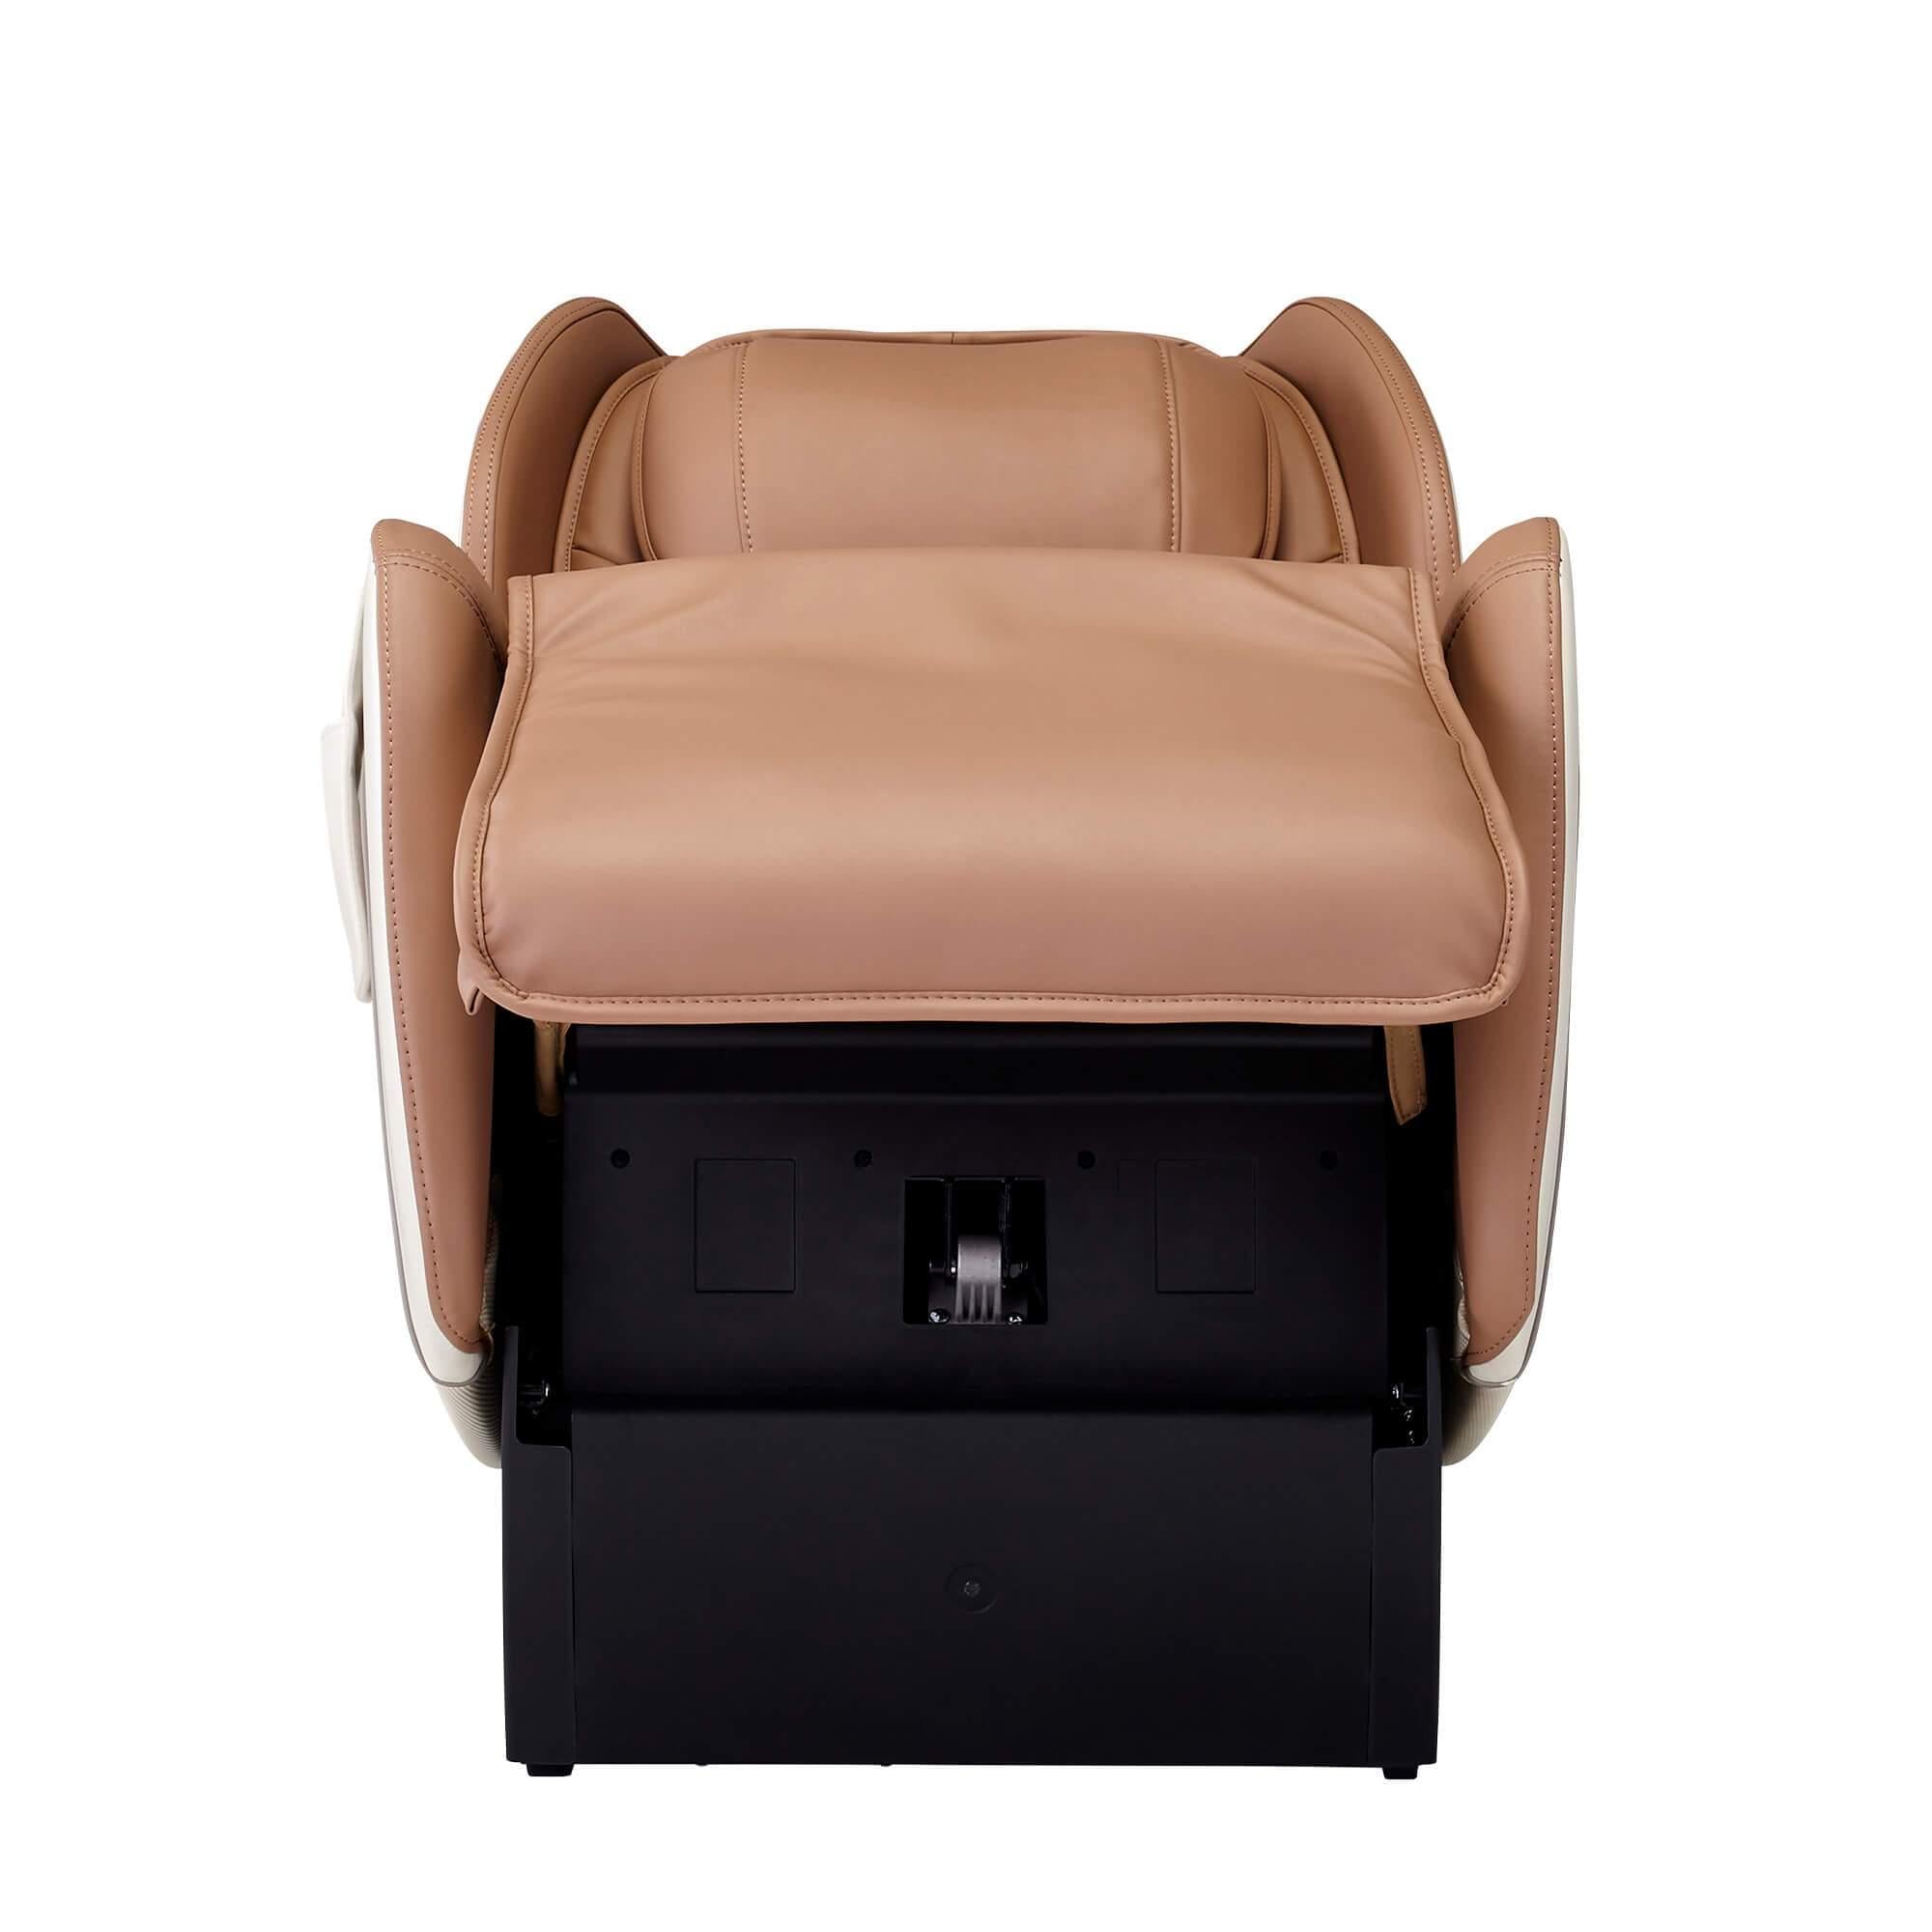 - Plus Unmatched CirC MASSAGE Chair – Synca and ZEBRA CHAIRS Massage Style Comfort